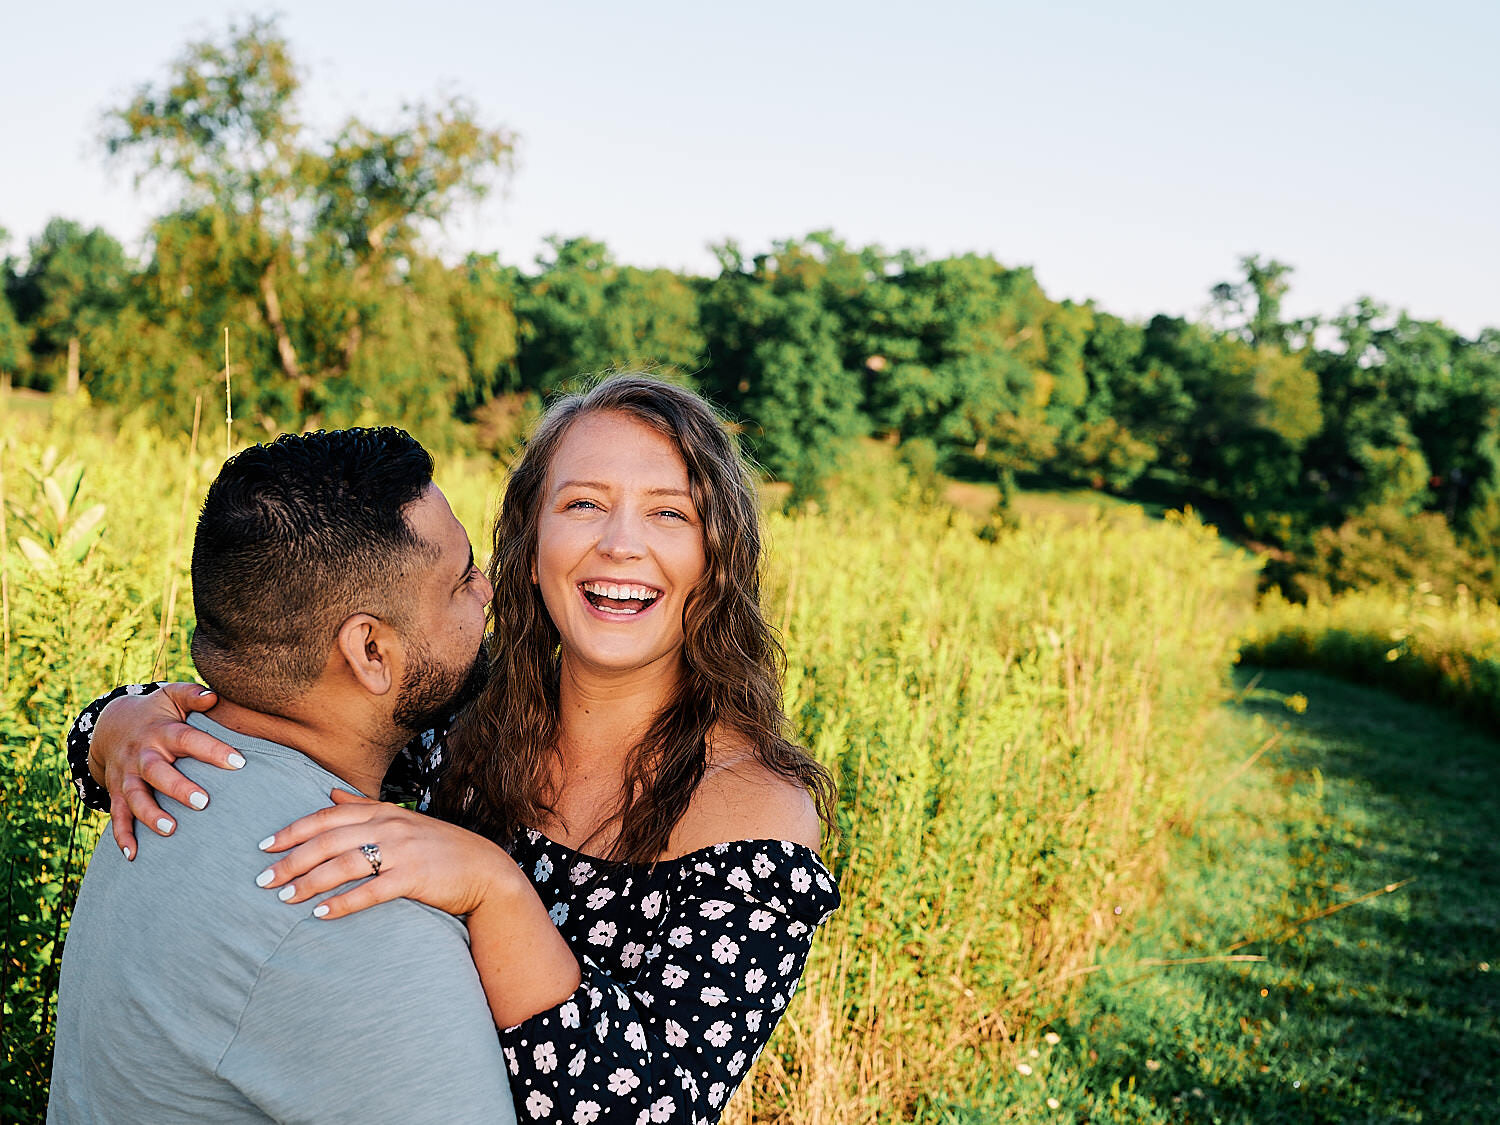  Sarah Trovato and Erick Ortiz are celebrating their engagement to get married on a hot summer day in Fern Hollow Nature Center near Sewickley, Pennsylvania. They look blissfully happy and joyful. 